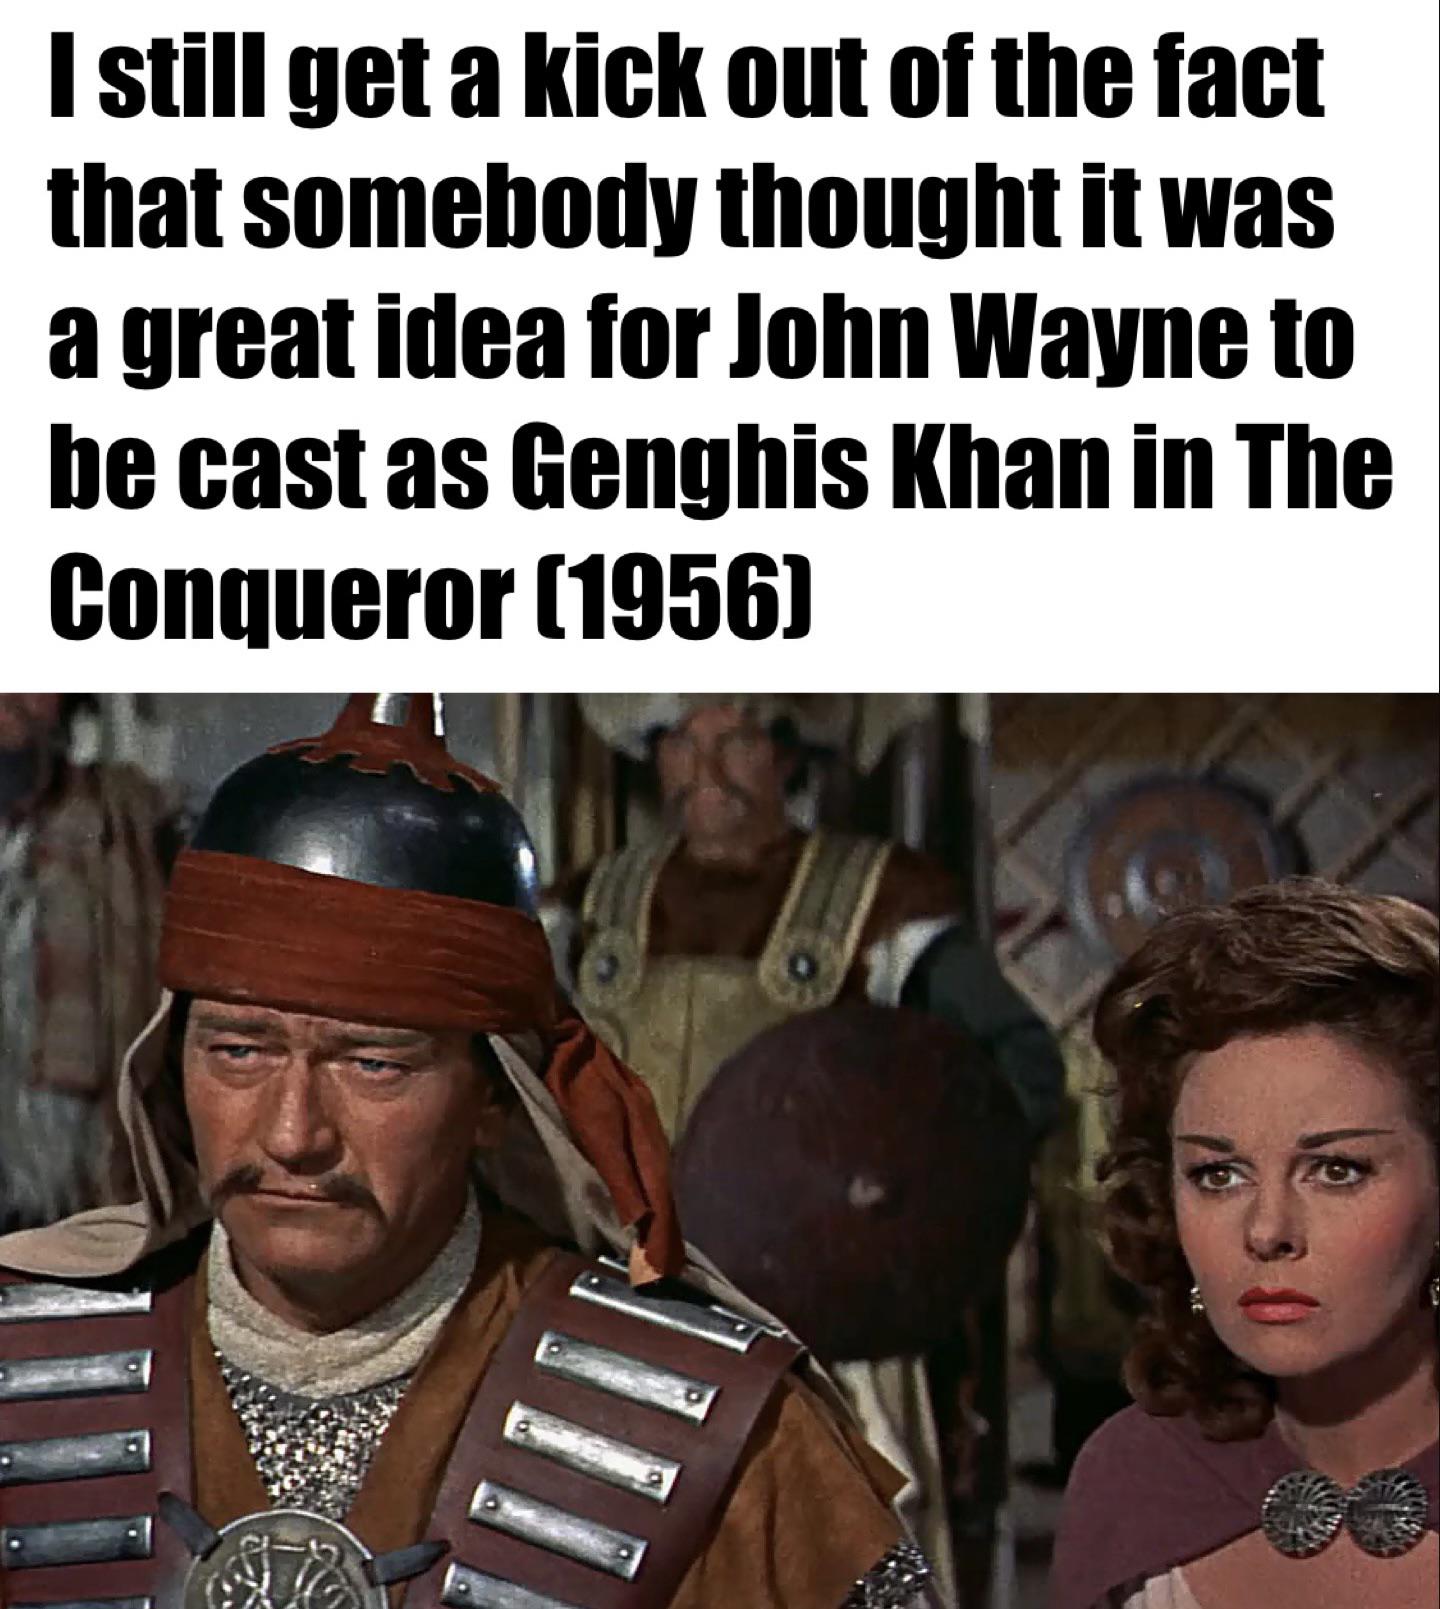 dank memes - The Conqueror - I still get a kick out of the fact that somebody thought it was a great idea for John Wayne to be cast as Genghis Khan in The Conqueror 1956